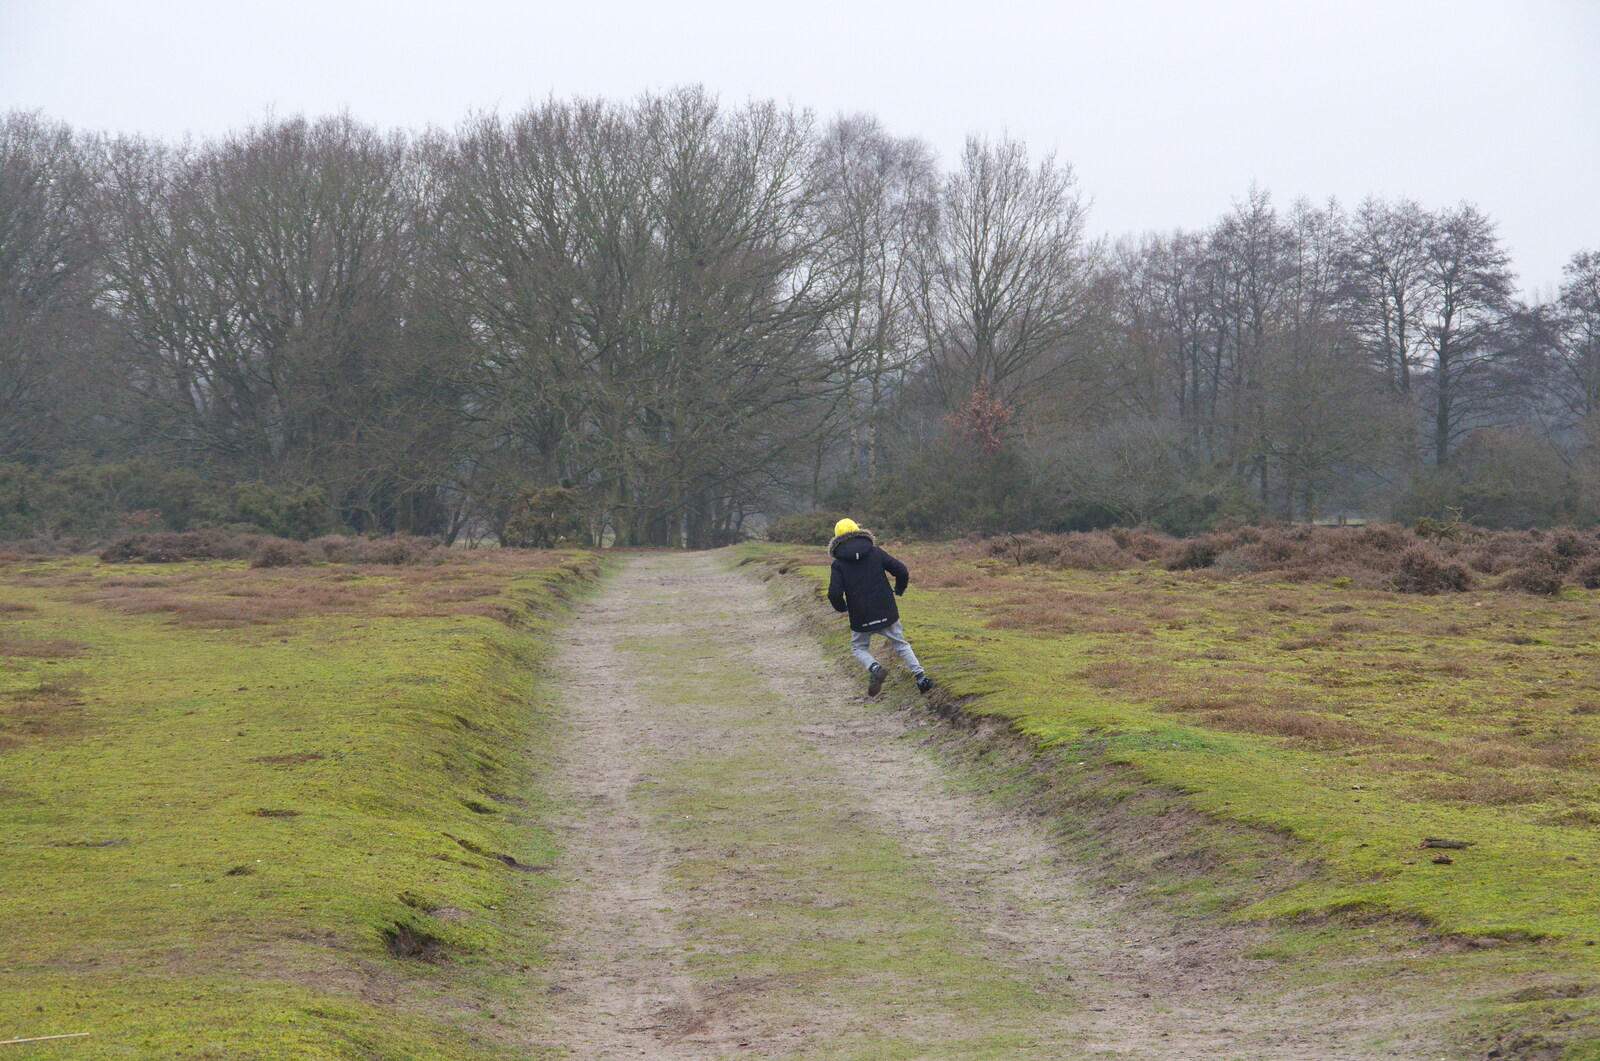 More running about from New Year's Day on the Ling, Wortham, Suffolk - 1st January 2020